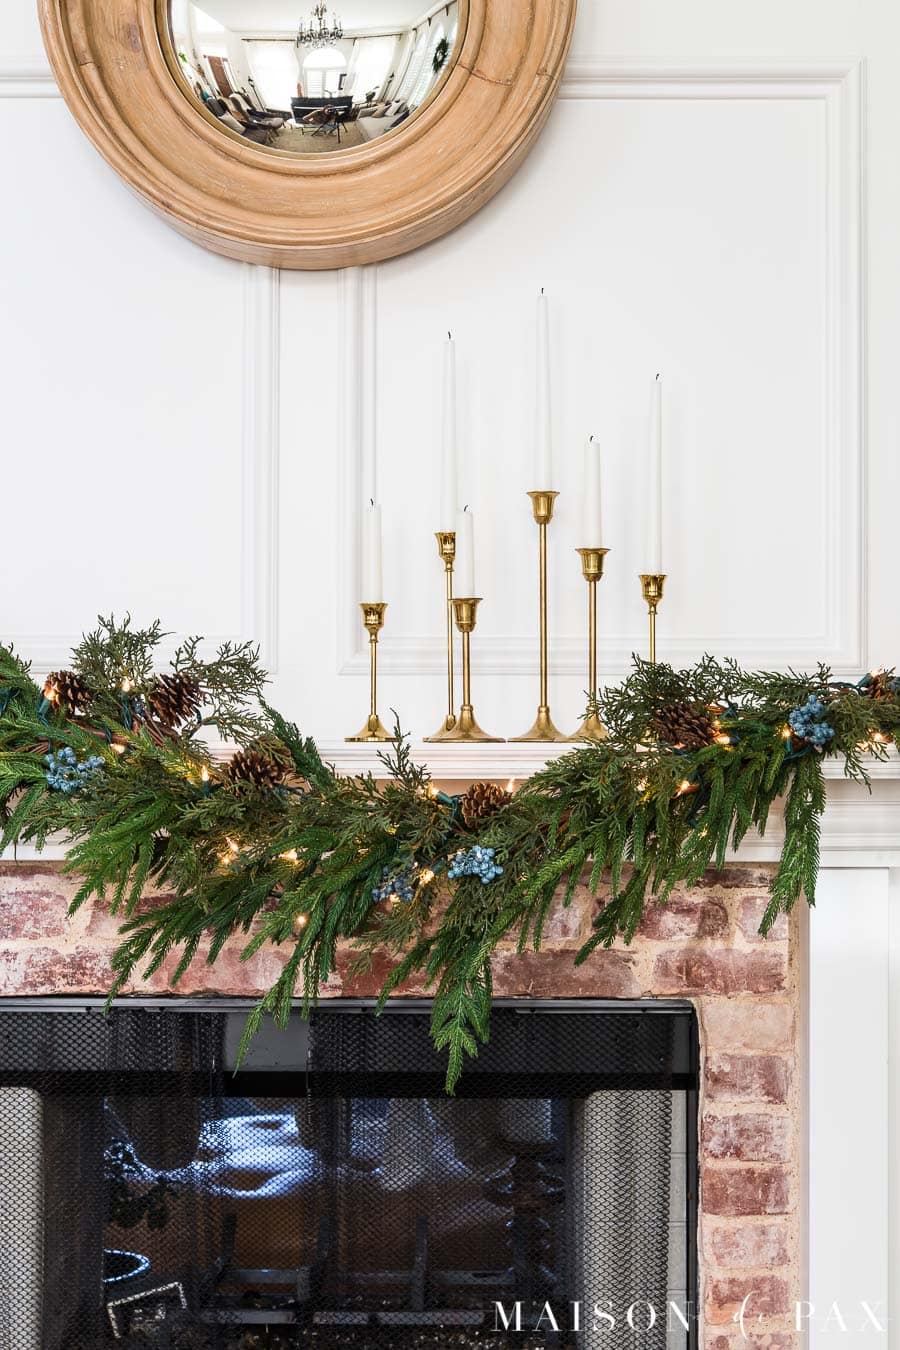 essential holiday decor: brass candlesticks and greenery for holiday mantel